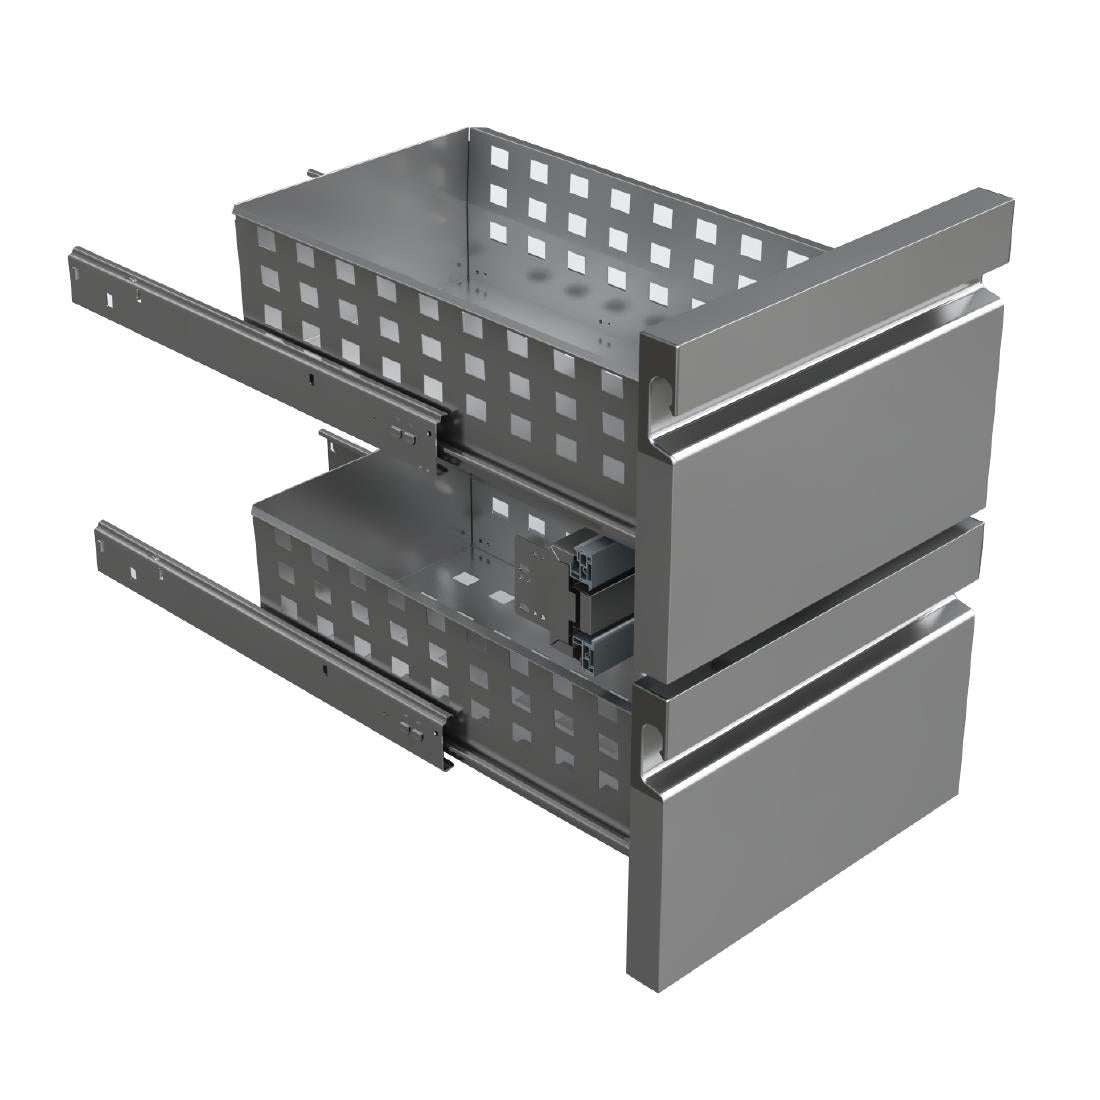 FU019 Fagor Advance Kit Drawers for Counter Units 1/2 & 1/2 GN ADV JD Catering Equipment Solutions Ltd